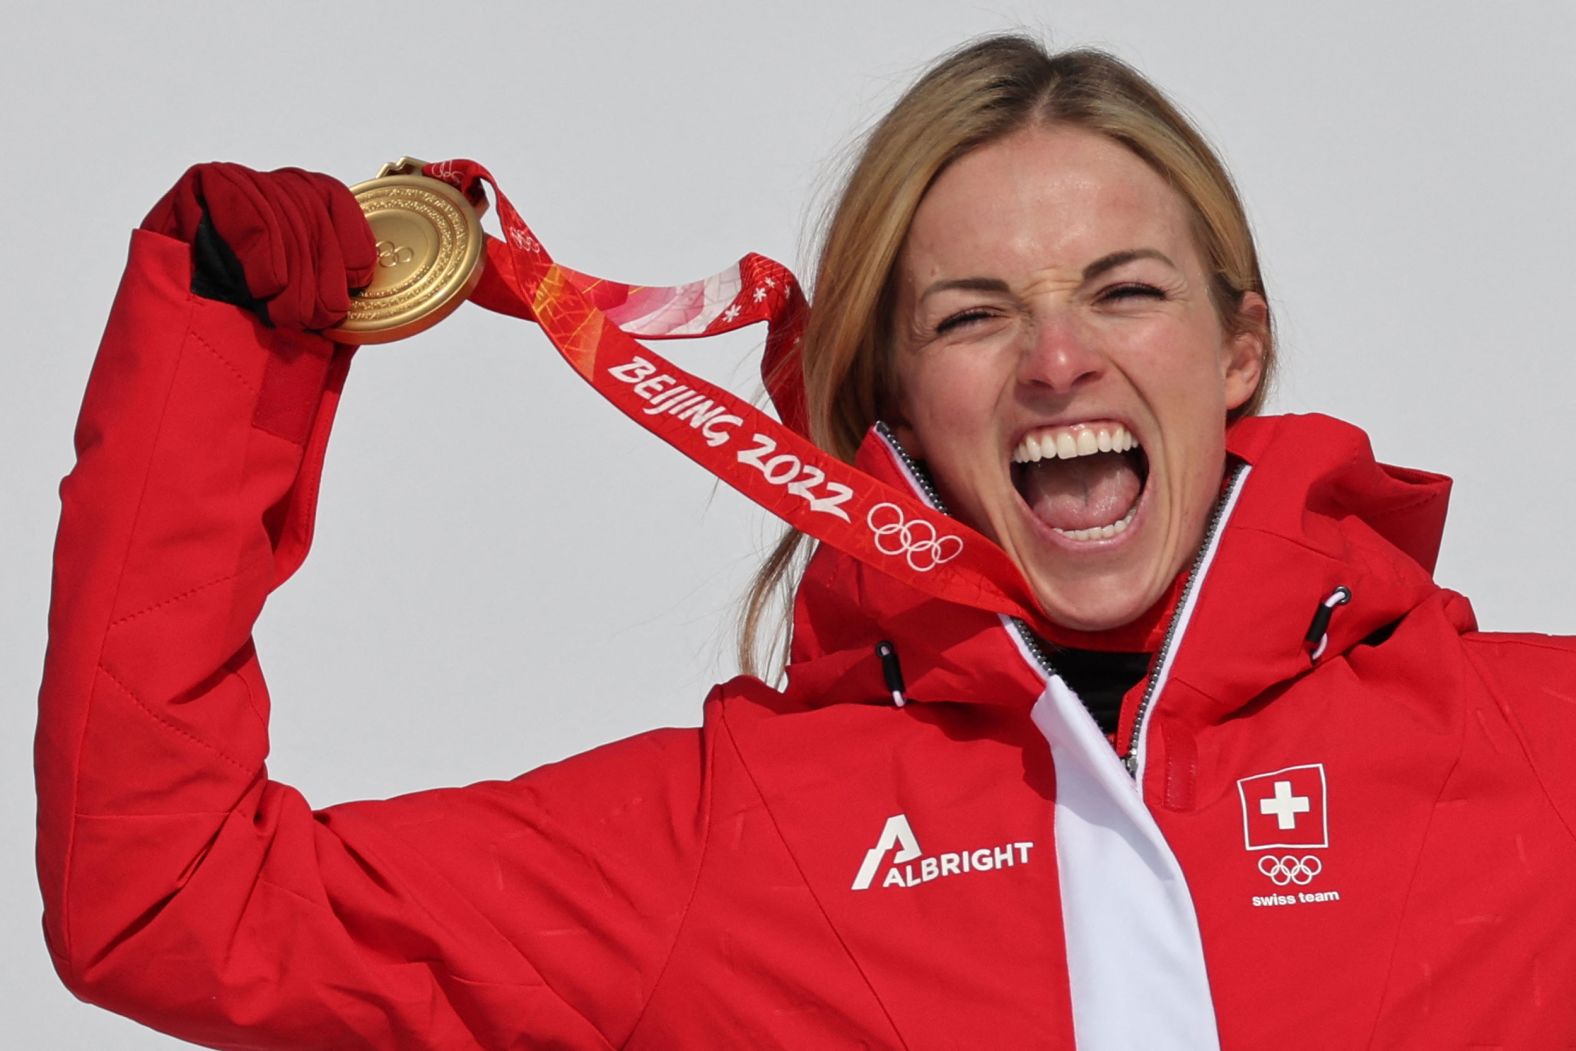 Swiss skier Lara Gut-Behrami celebrates with her gold medal after <a href="index.php?page=&url=https%3A%2F%2Fwww.cnn.com%2Fworld%2Flive-news%2Fbeijing-winter-olympics-02-11-22-spt%2Fh_184f7fab8796a9792844c05daffbd34e" target="_blank">winning the super-G</a> on February 11. It was the third Olympic medal of her career but her first gold.